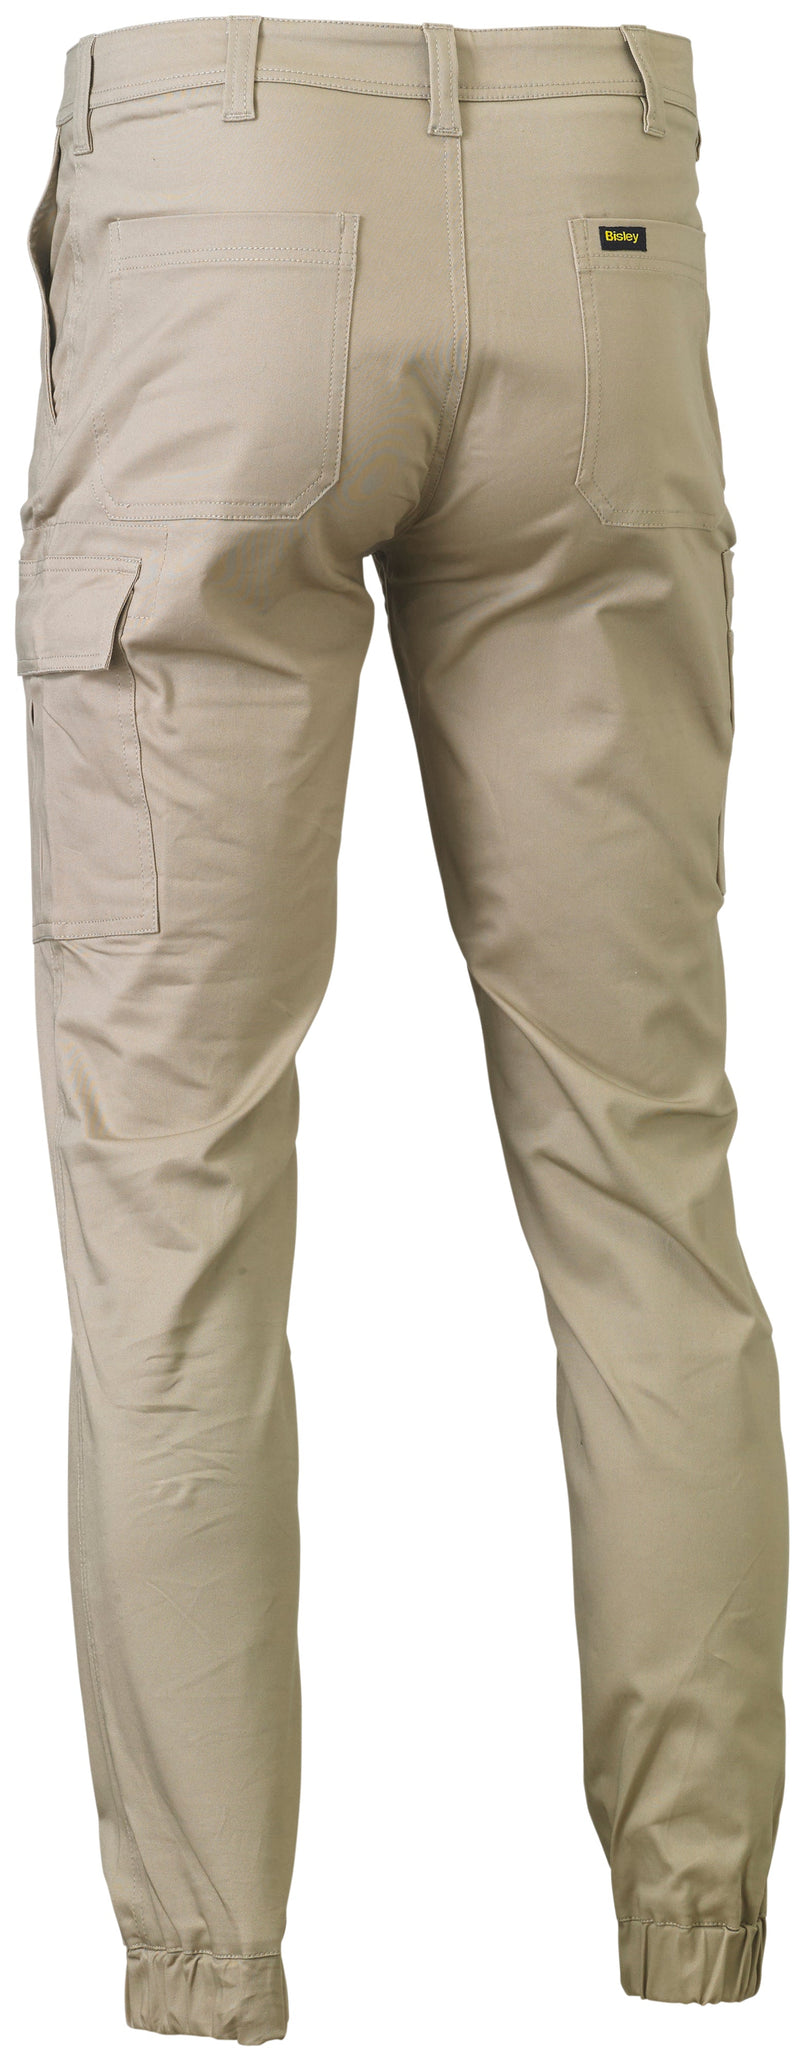 Bisley Women's Taped Cotton Cargo Cuffed Pants -(BPL6028T